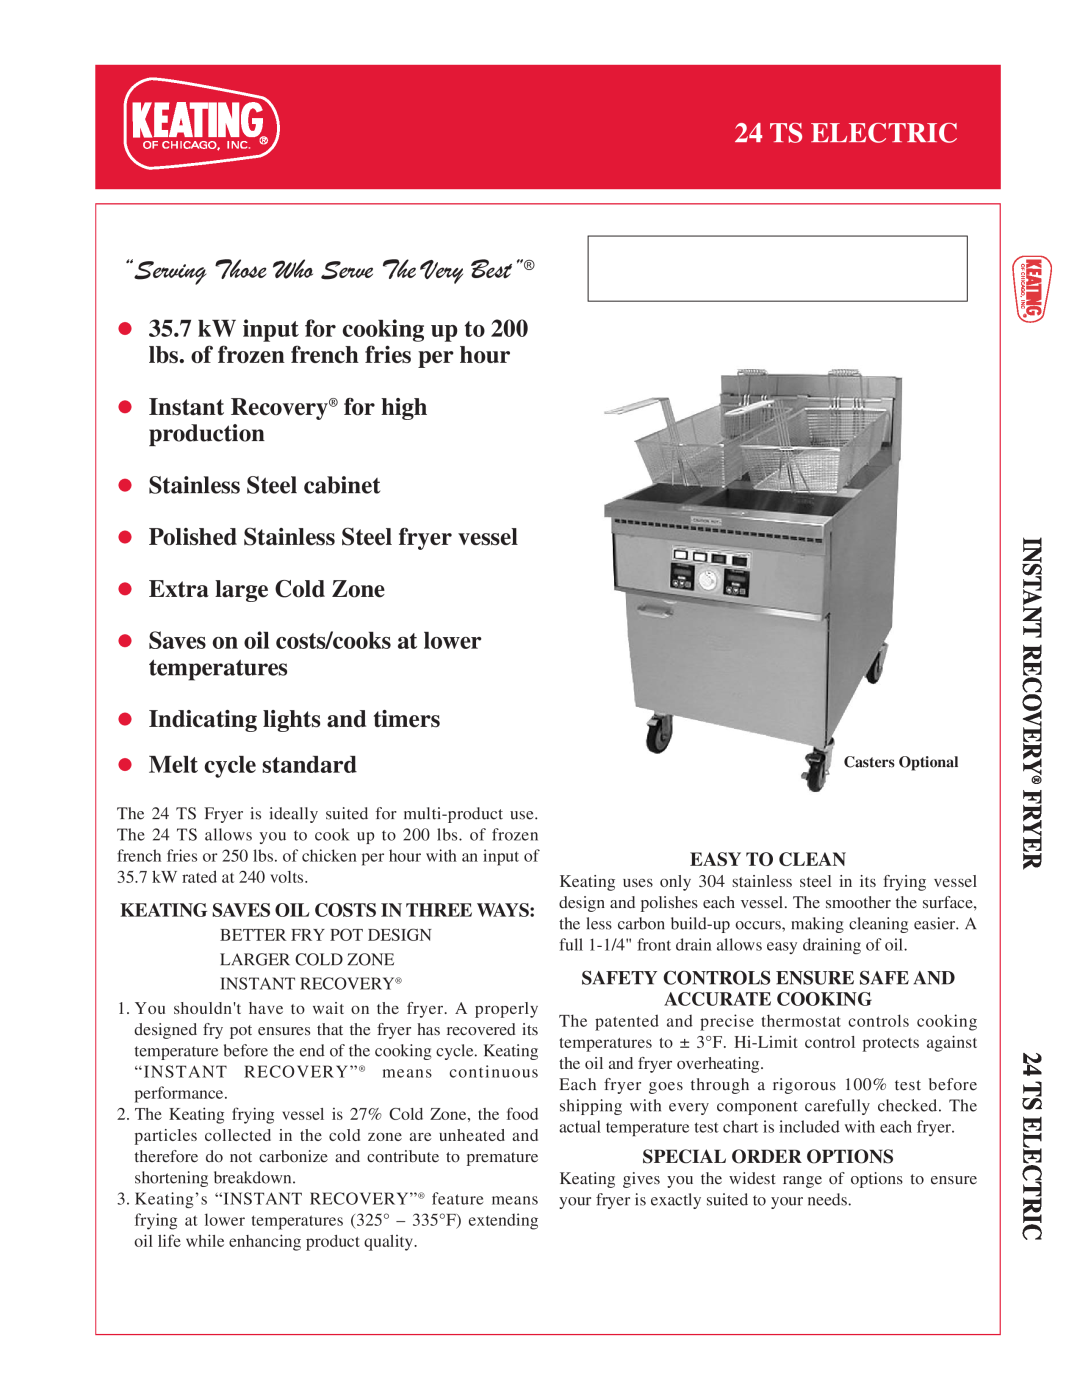 Keating Of Chicago manual Ts Electric, INSTANT RECOVERY FRYER 24 TS ELECTRIC, “Serving Those Who Serve The Very Best” 